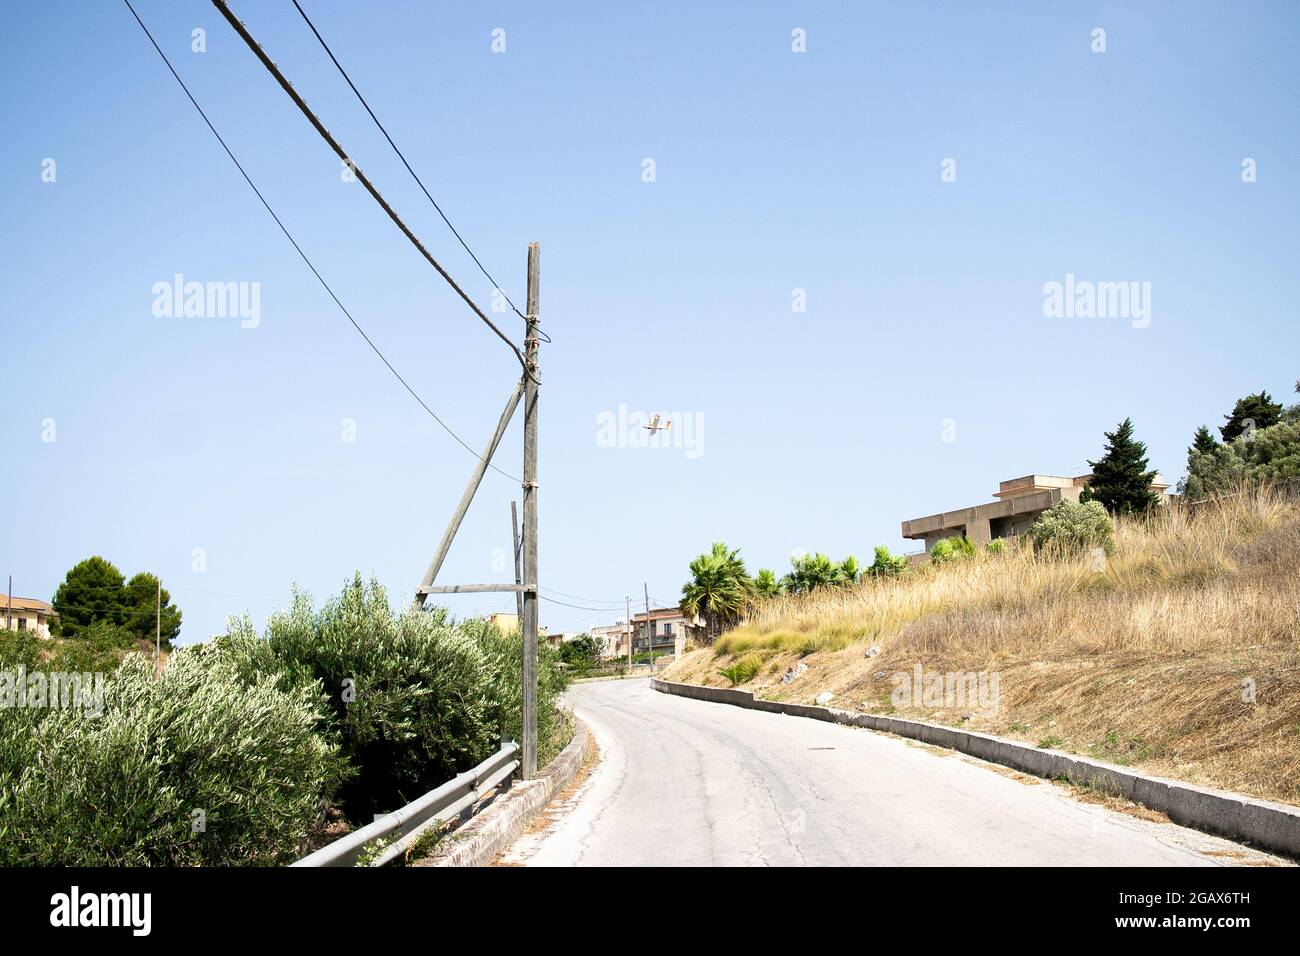 A walk in a small village near Trapani, Sicily Hot streets, torrid summer weather.  Heat and sultriness accompany the solitude of the suburbs. Stock Photo